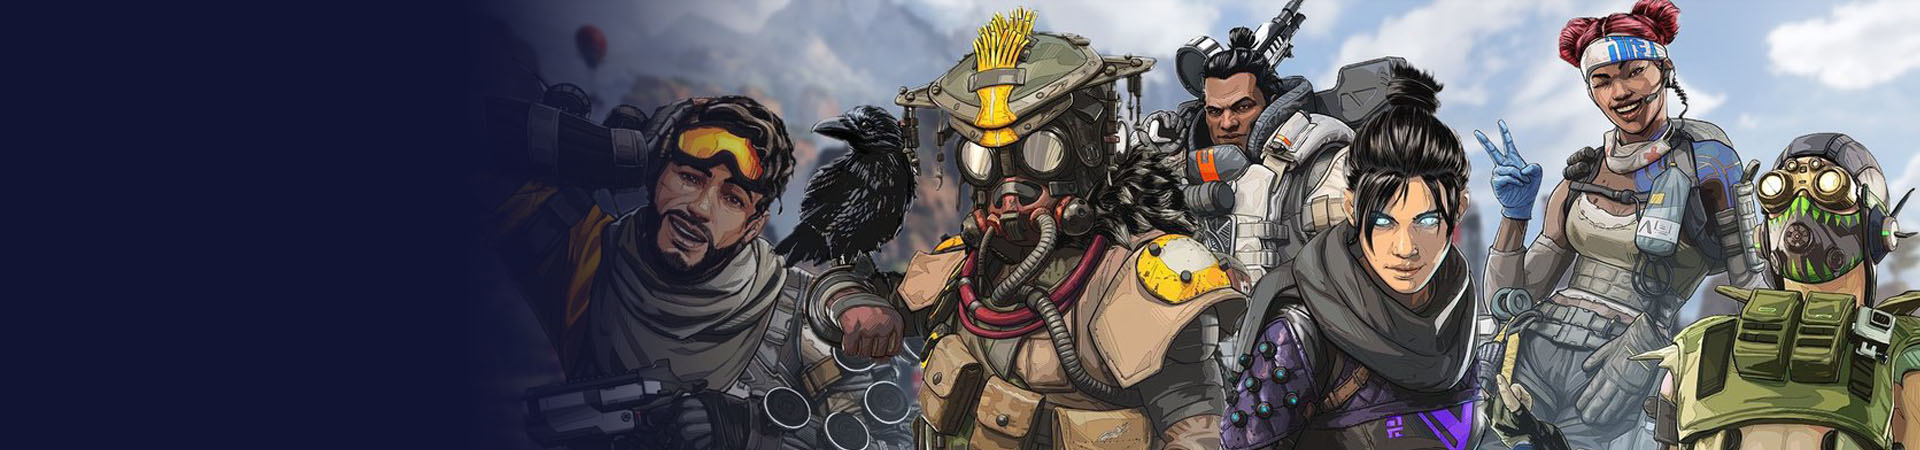 How to unlock Loba in Apex Legends Mobile banner